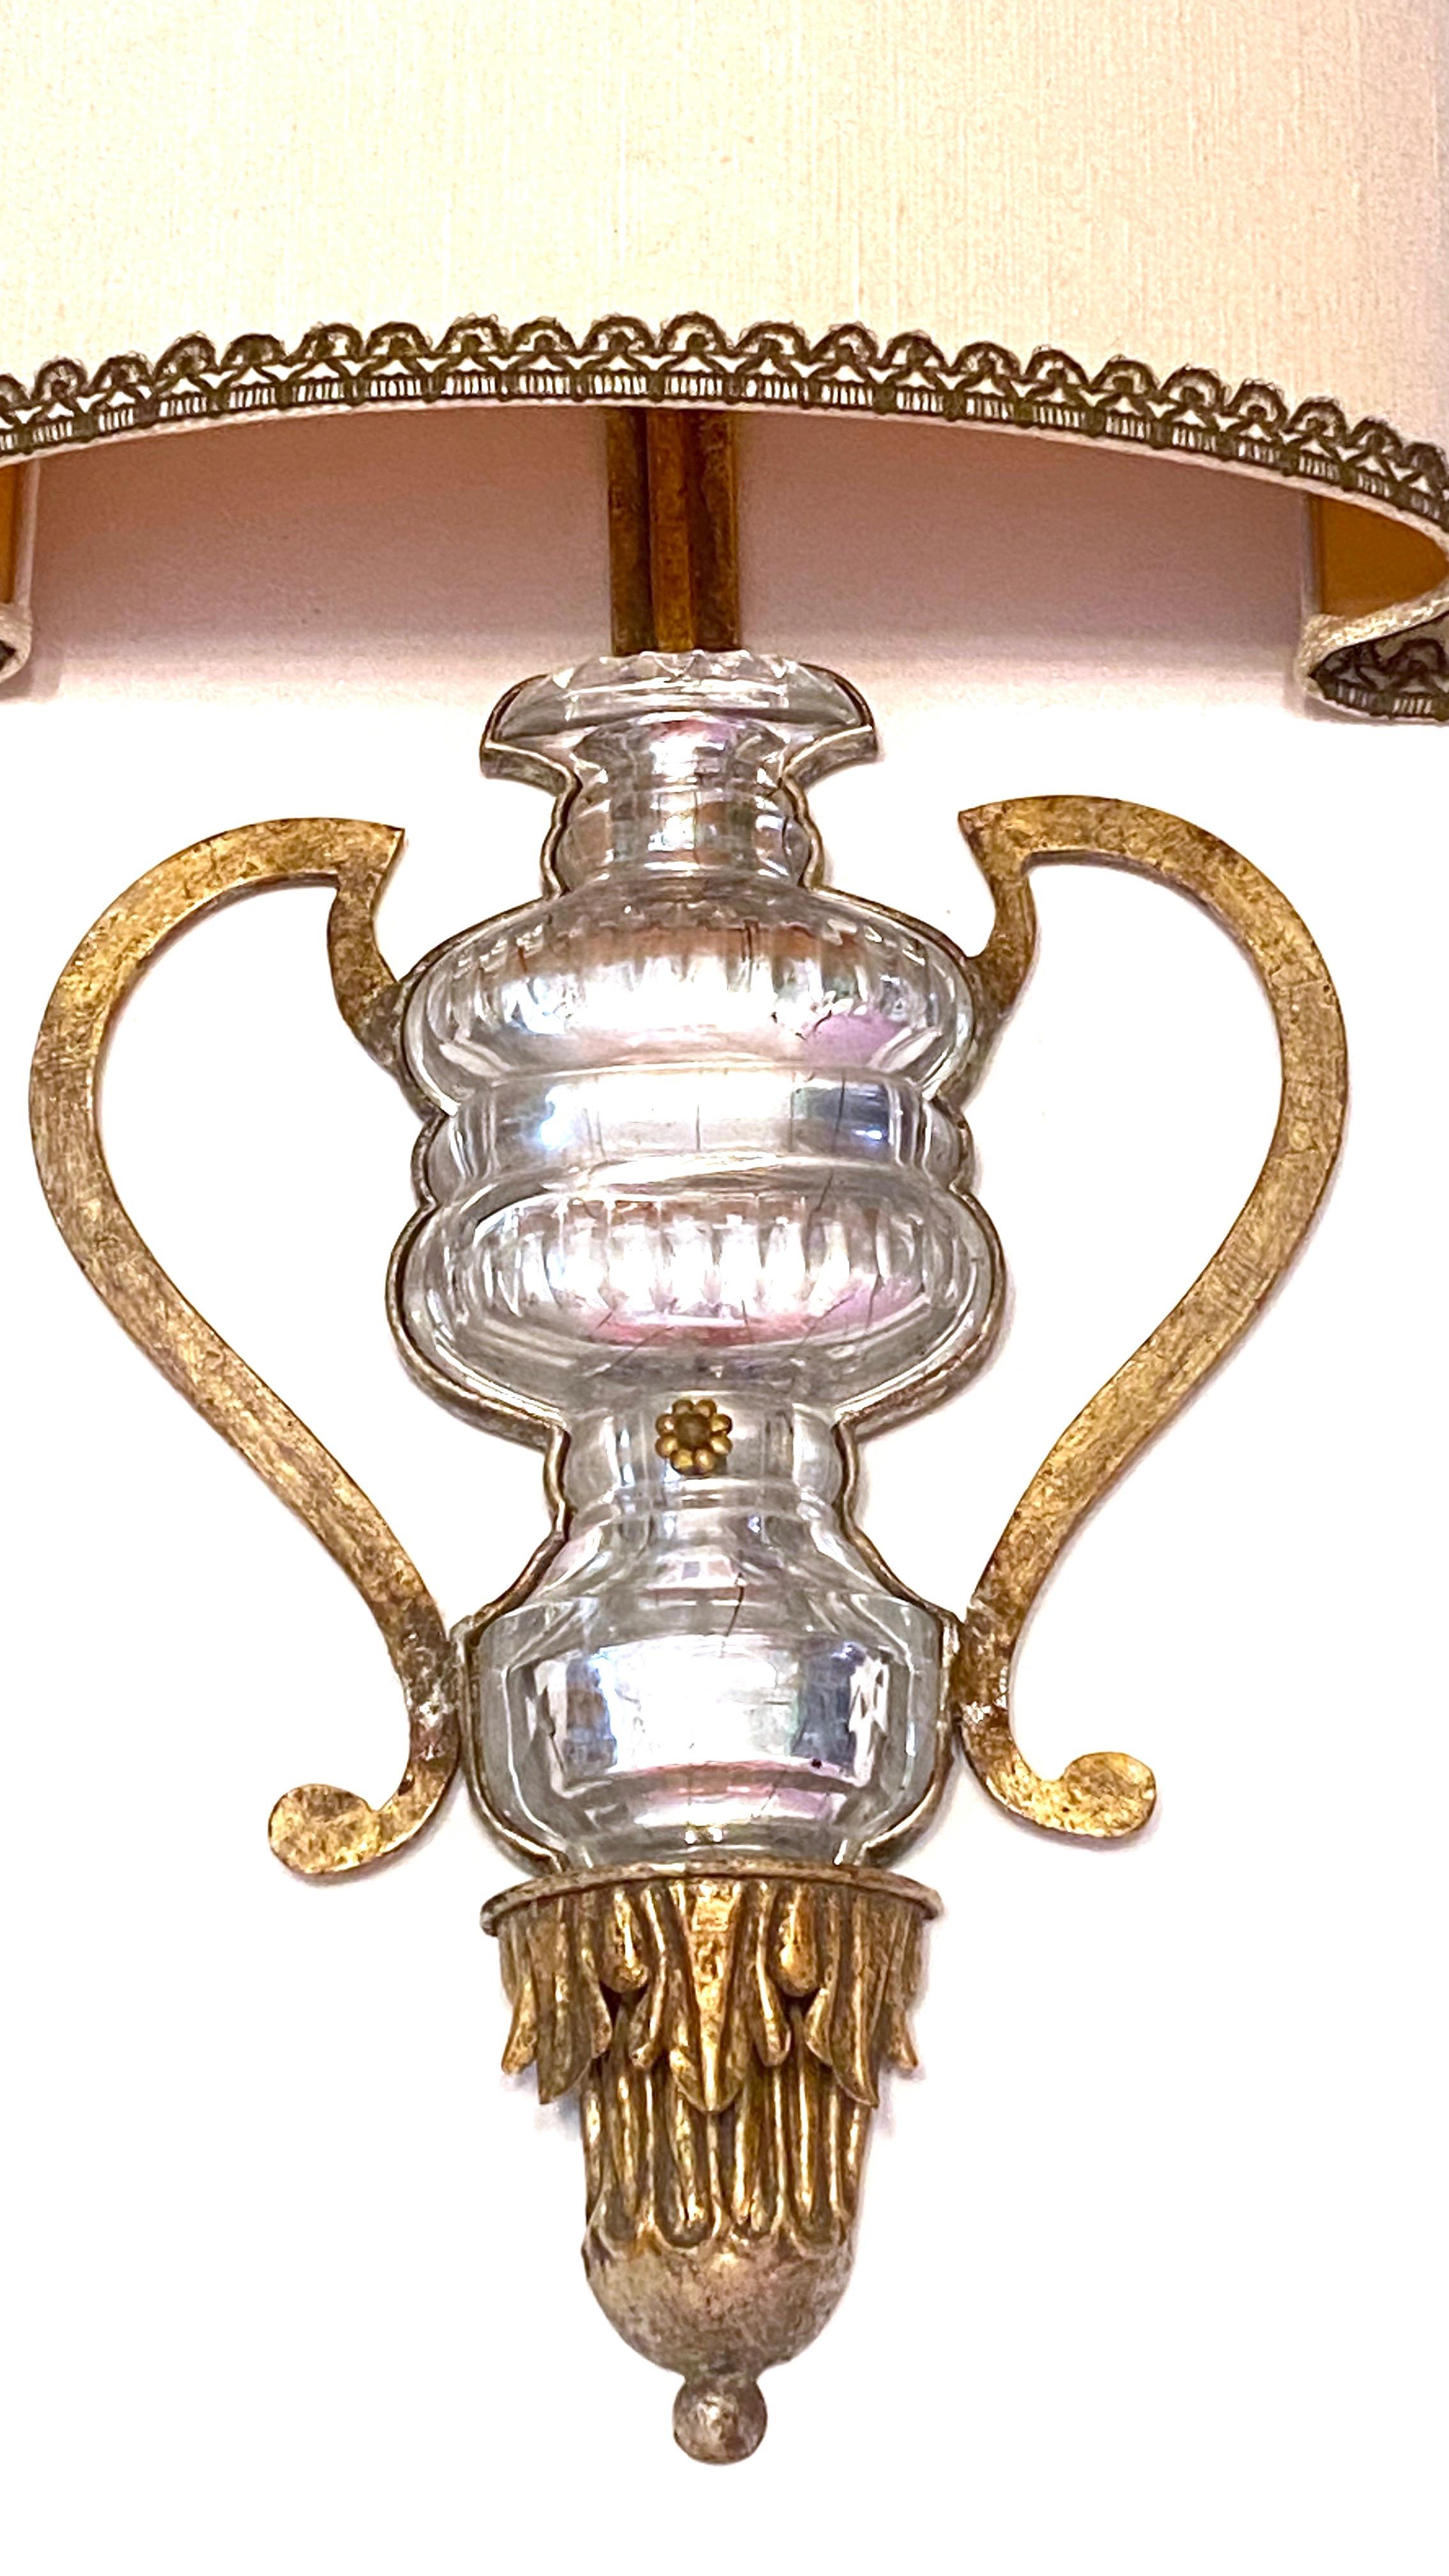 A single large sconce by Banci Firenze with crystal urn motif. The fixture requires two European E14 candelabra bulbs, each bulb up to 60 watts. The wall light has a beautiful patina and gives each room a eclectic statement. Made of metal and